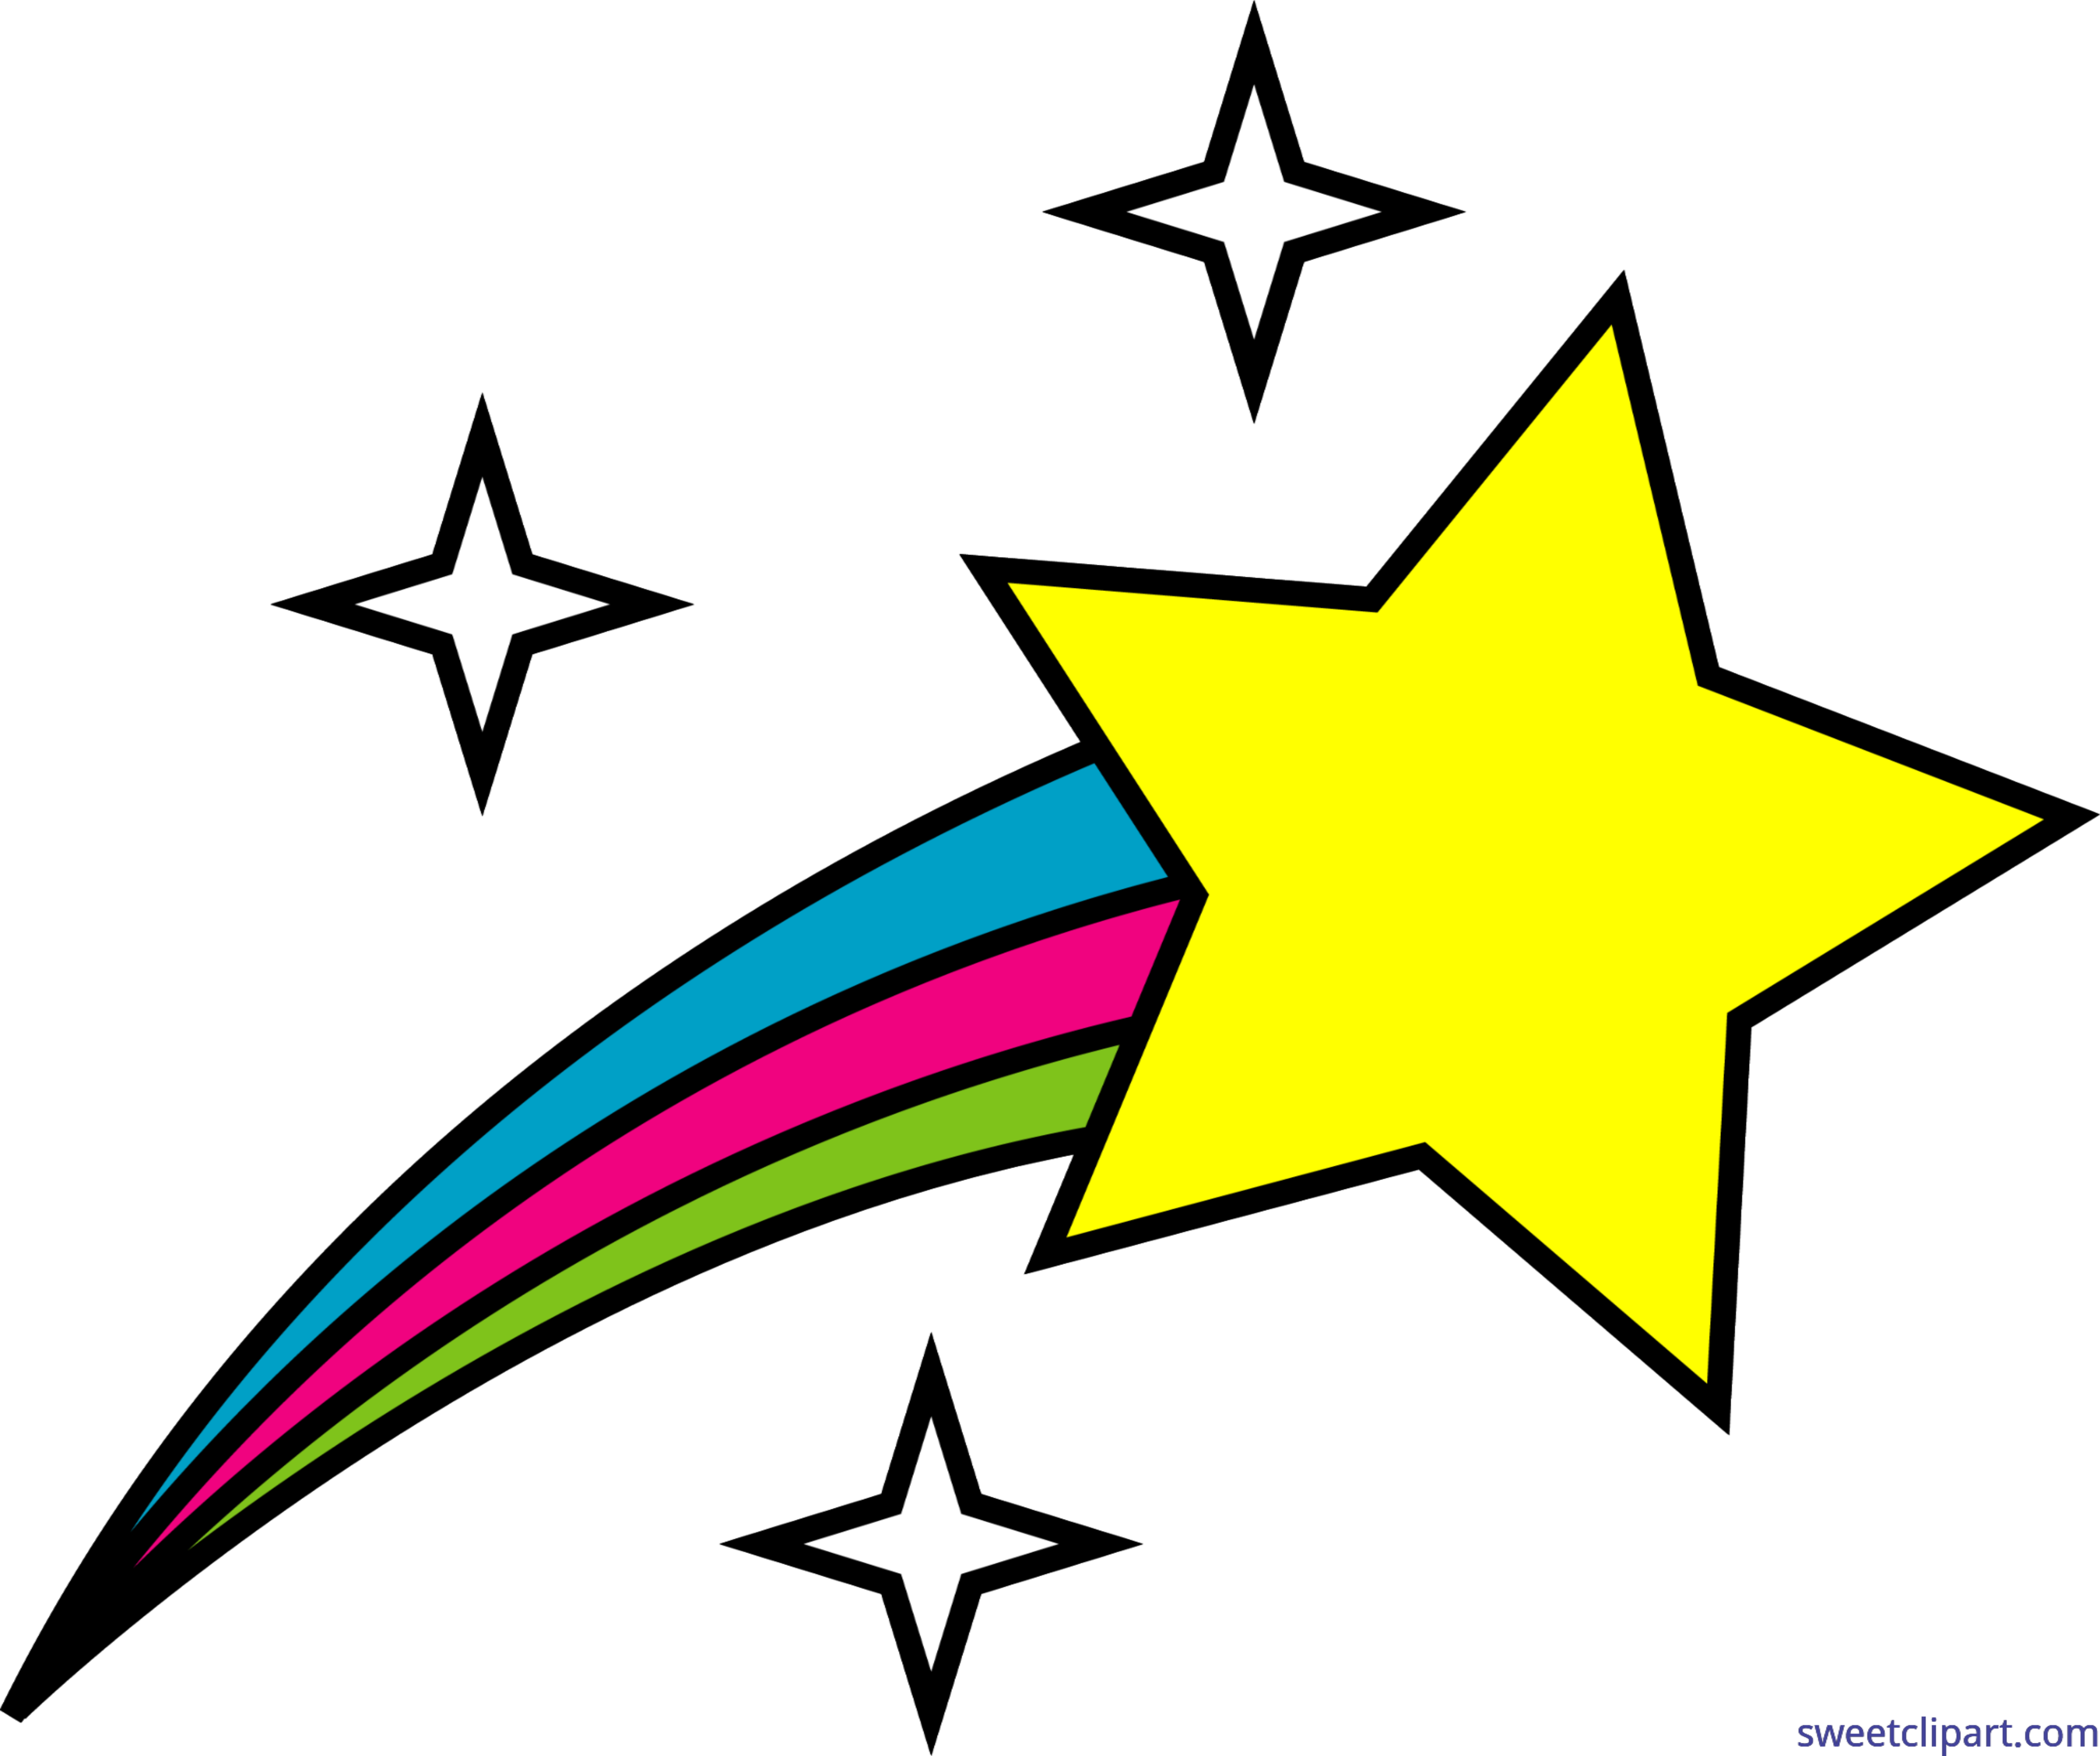 Outer space symbol shooting. Star clip art